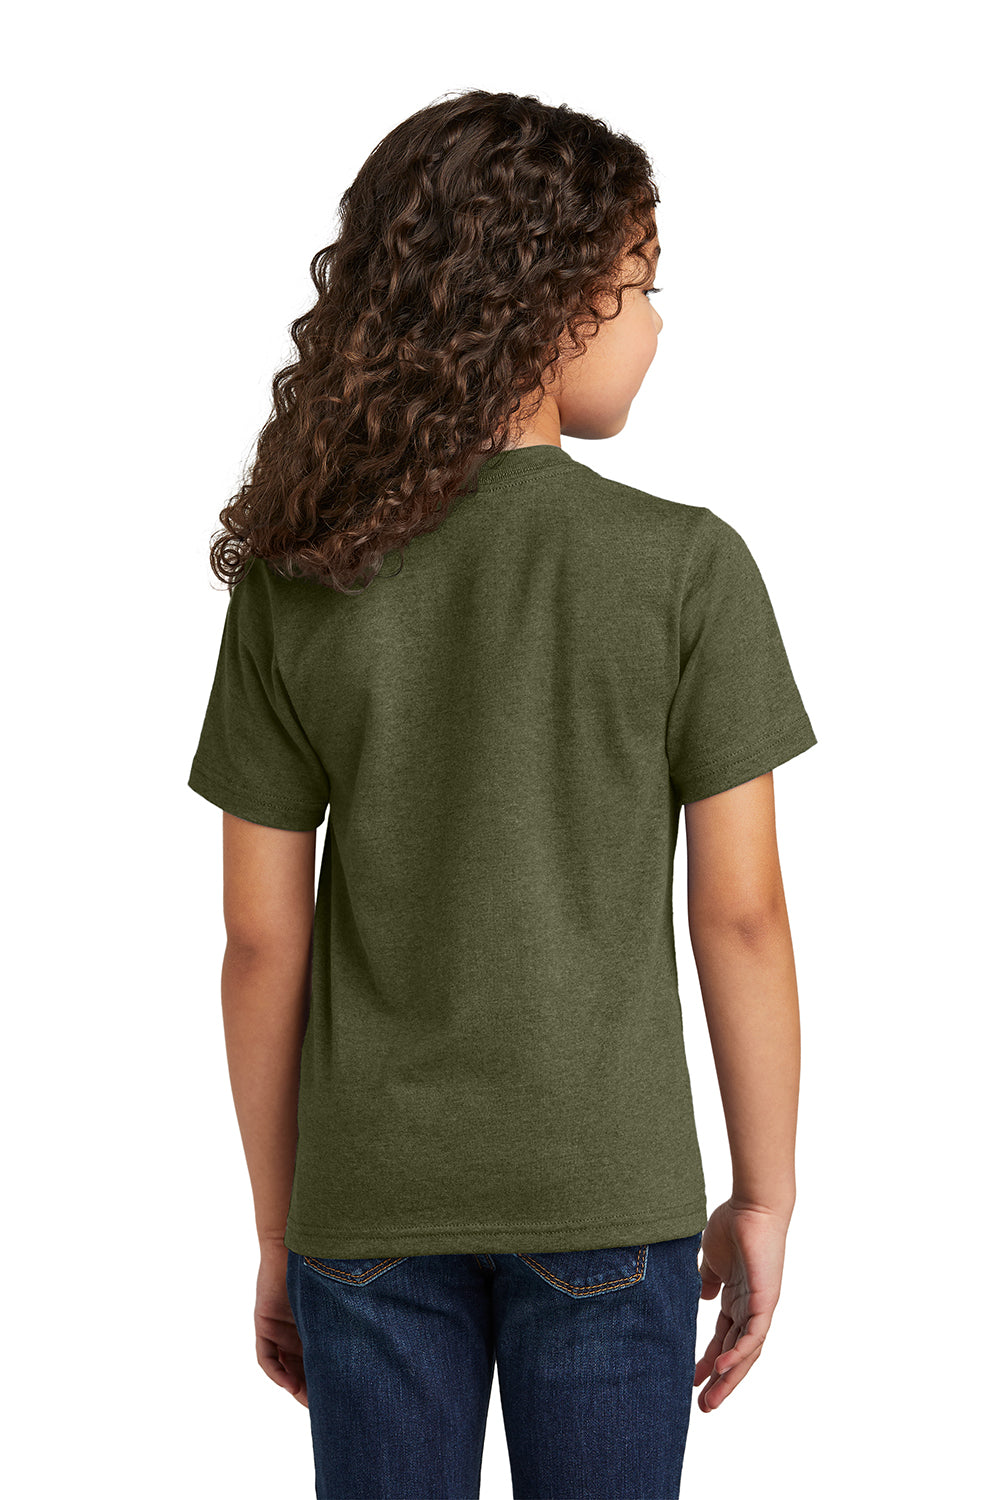 Port & Company PC330Y Youth Short Sleeve Crewneck T-Shirt Heather Military Green Back